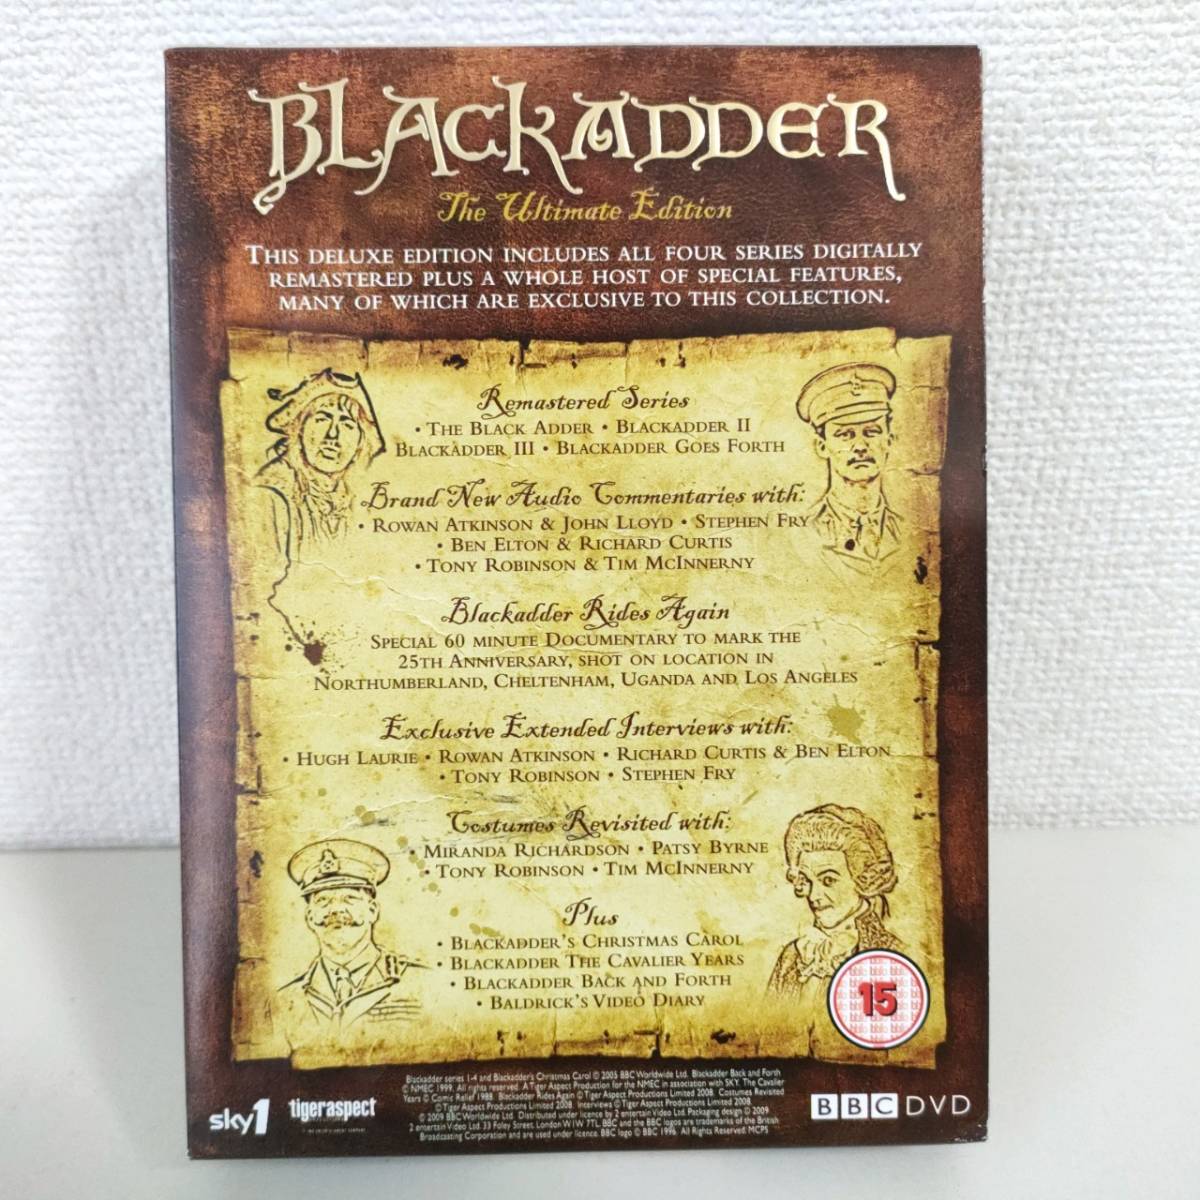 A070 英語DVD Black adder Remastered The Ultimate Edition Box Set DVD EXCLUSIVE EXTRAS BBC_画像3